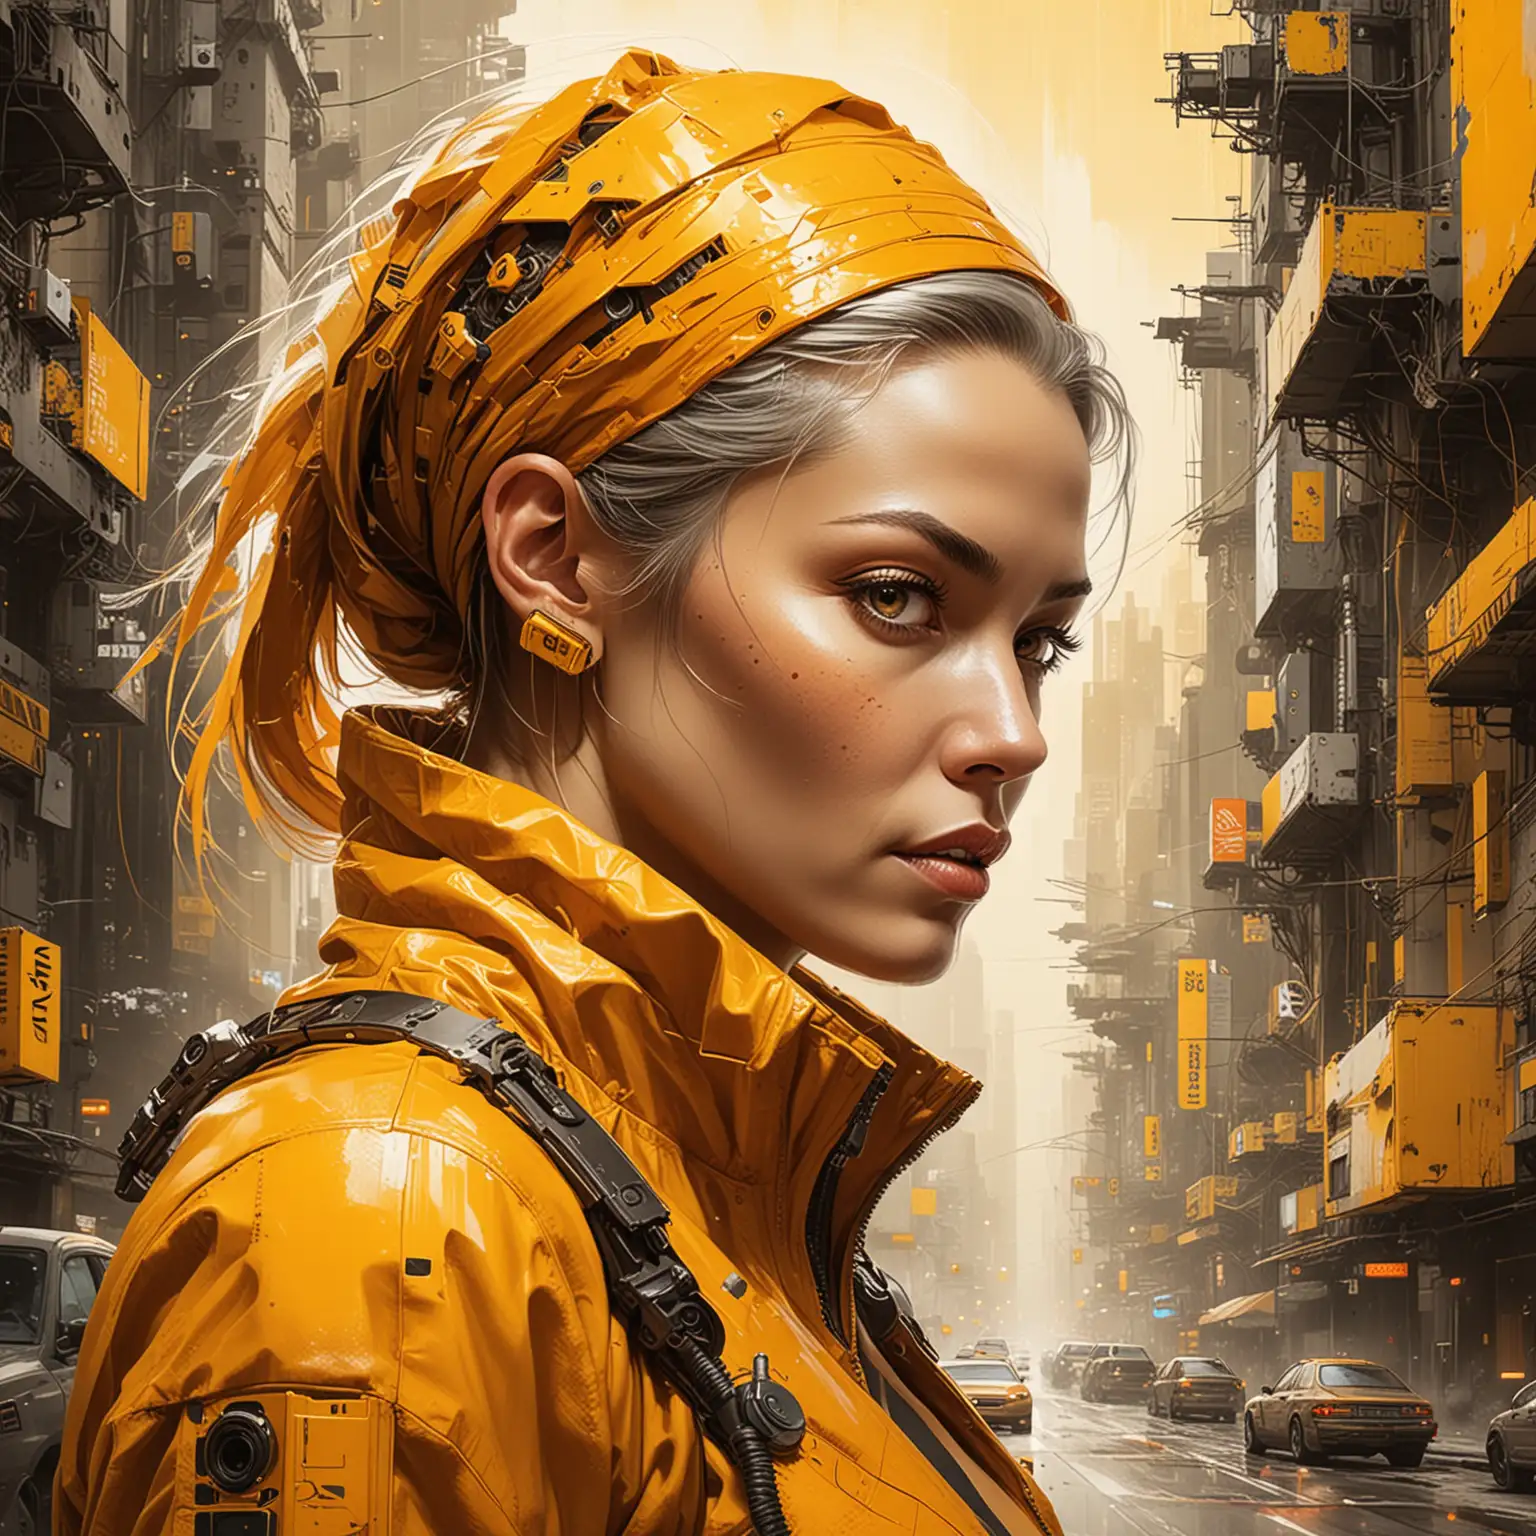 Design a bold and dynamic mixed-media artwork portraying a beautiful mature woman, a futuristic dystopia blending elements of cyberpunk and abstract expressionism, influenced by the styles of the gritty urban landscapes of tomorrow with {yellow} and {orange}.